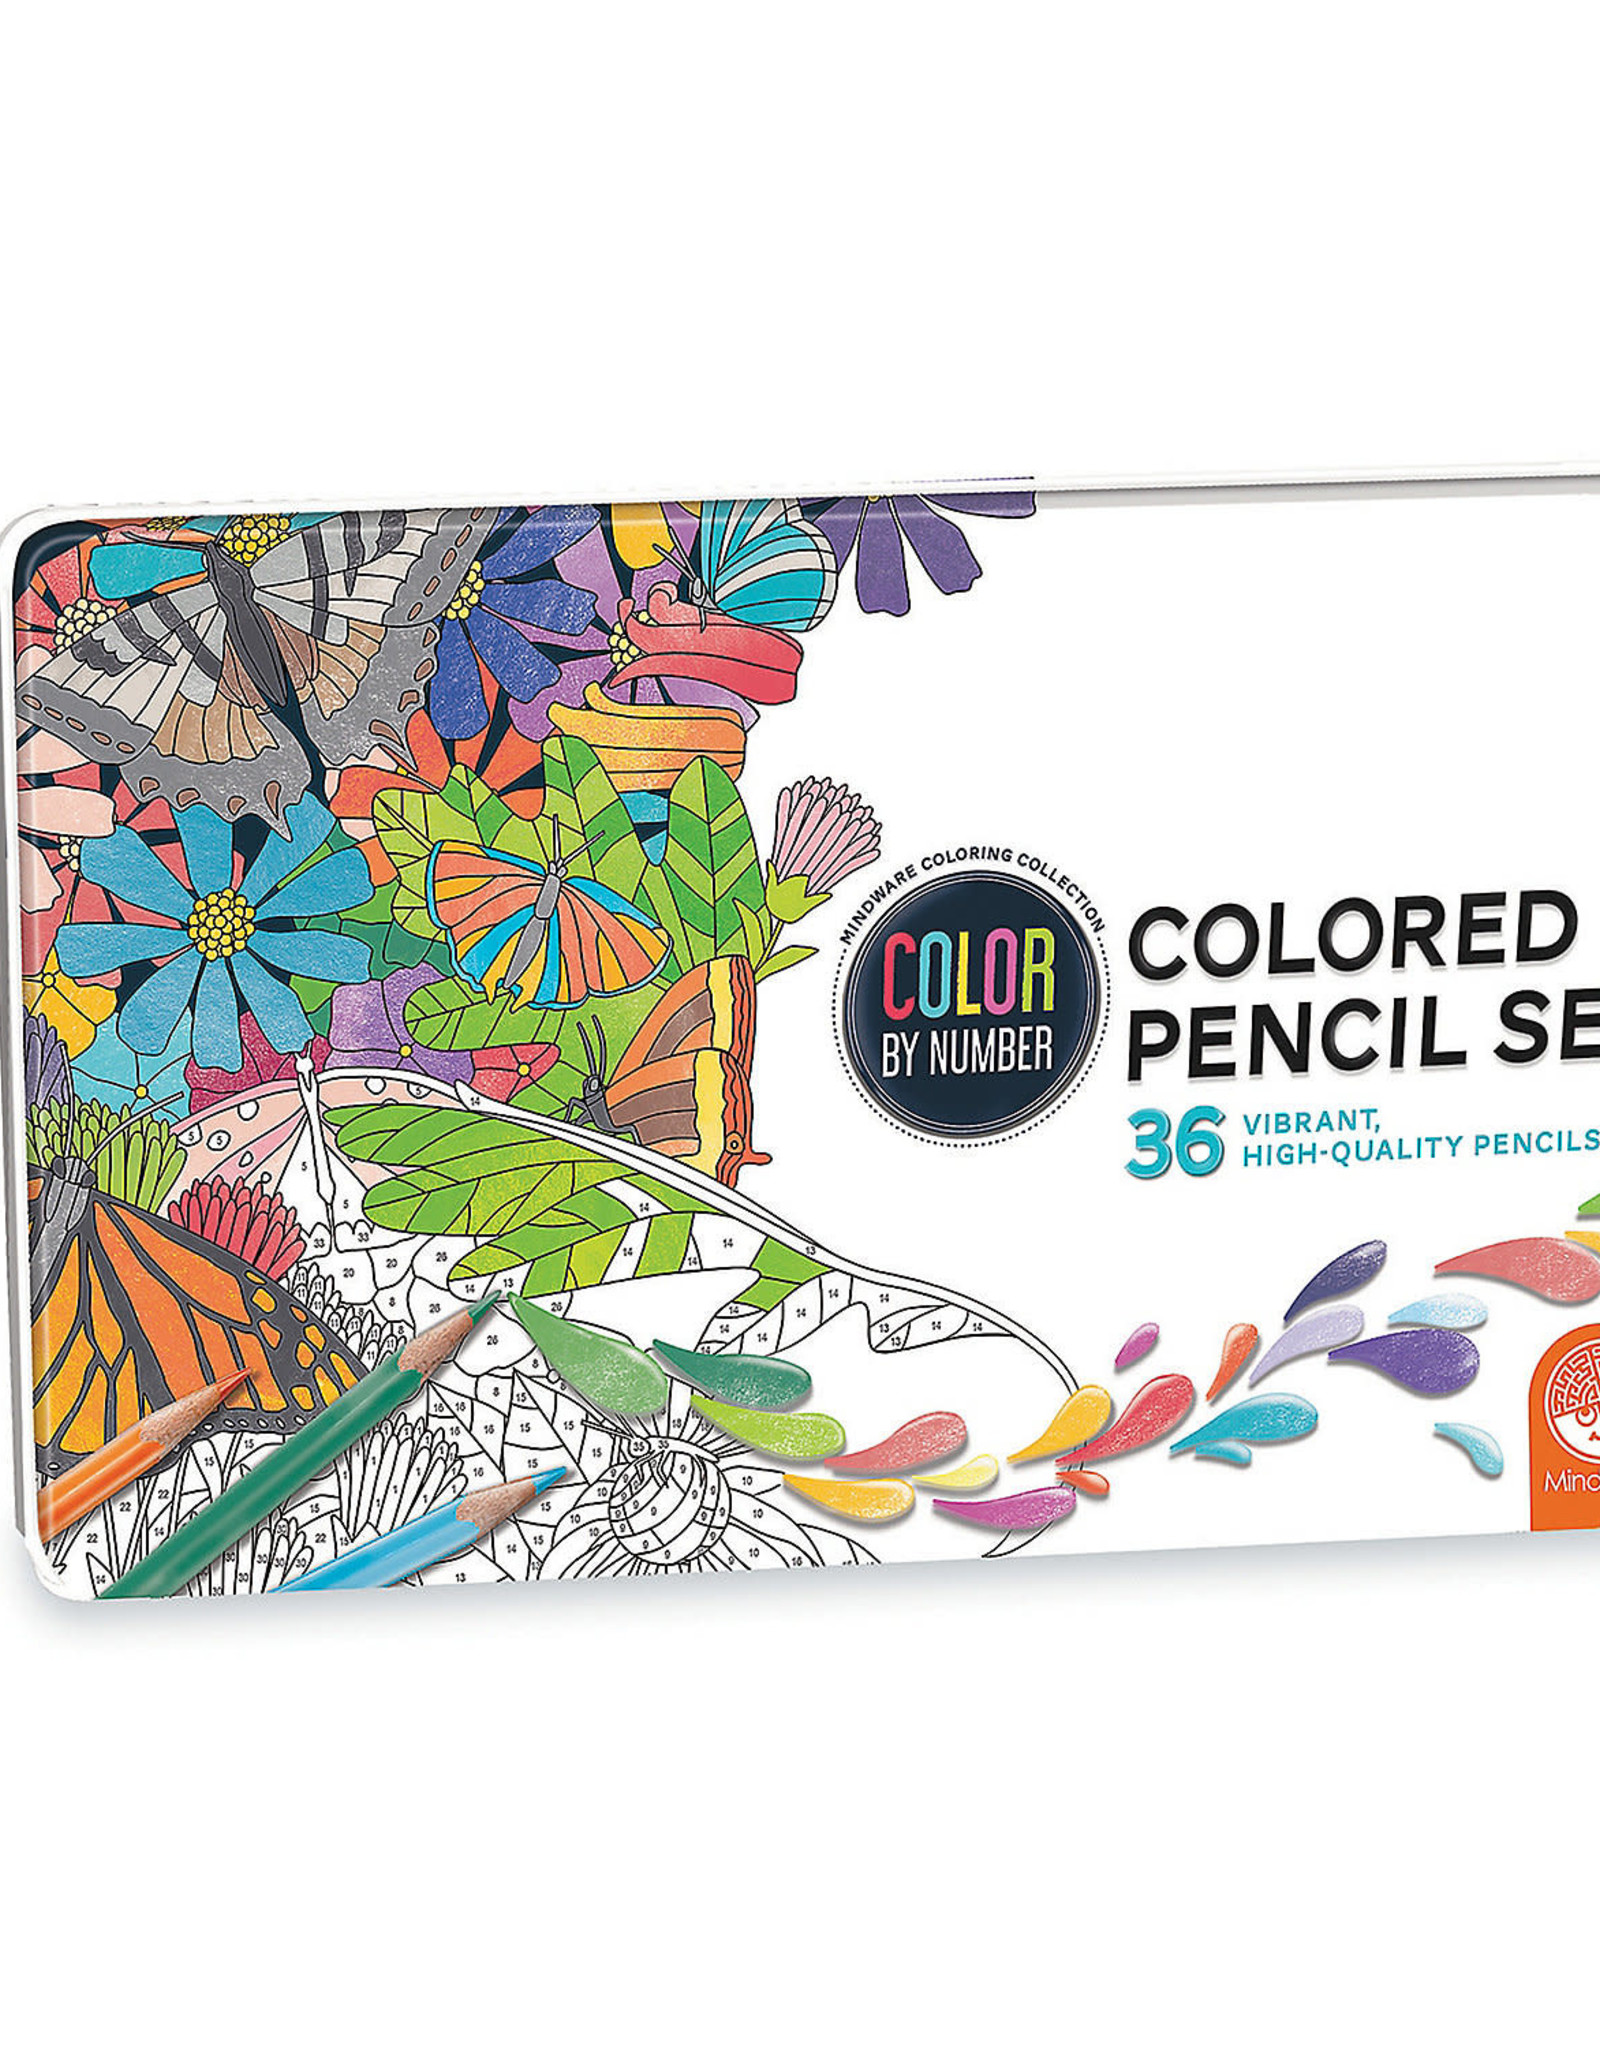 Color By Number 36 Colored Pencil Set